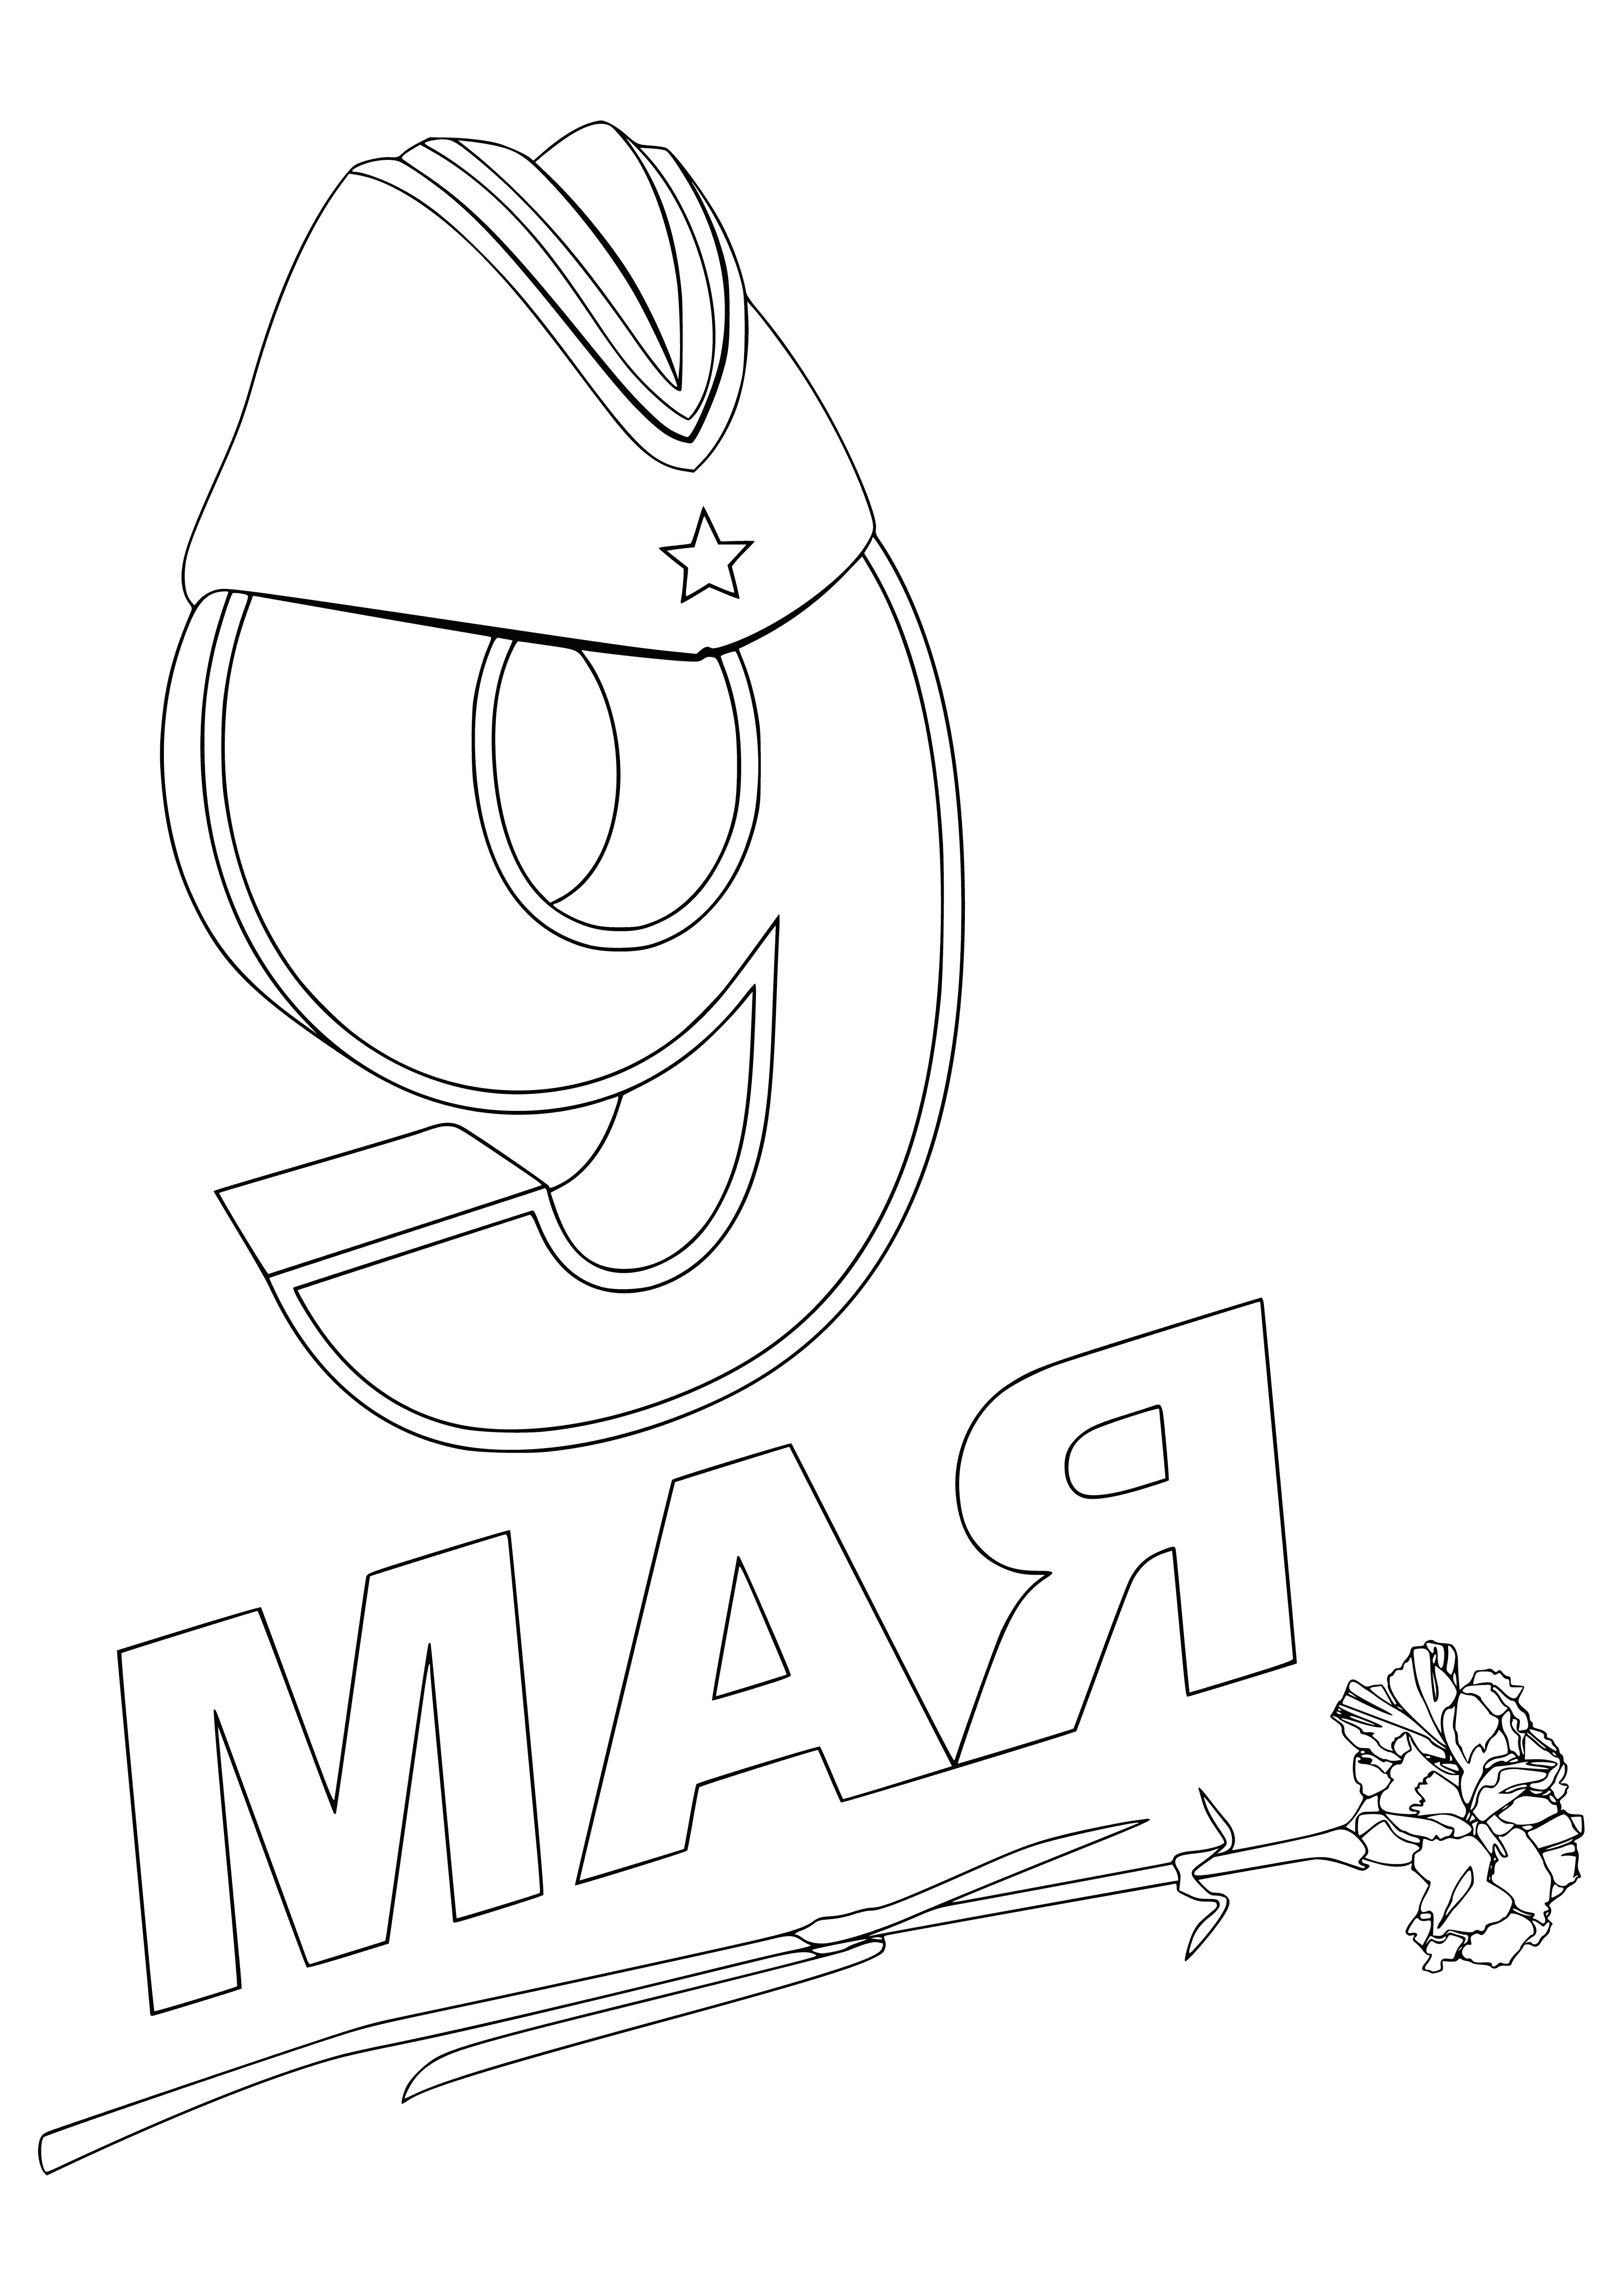 9th May coloring page